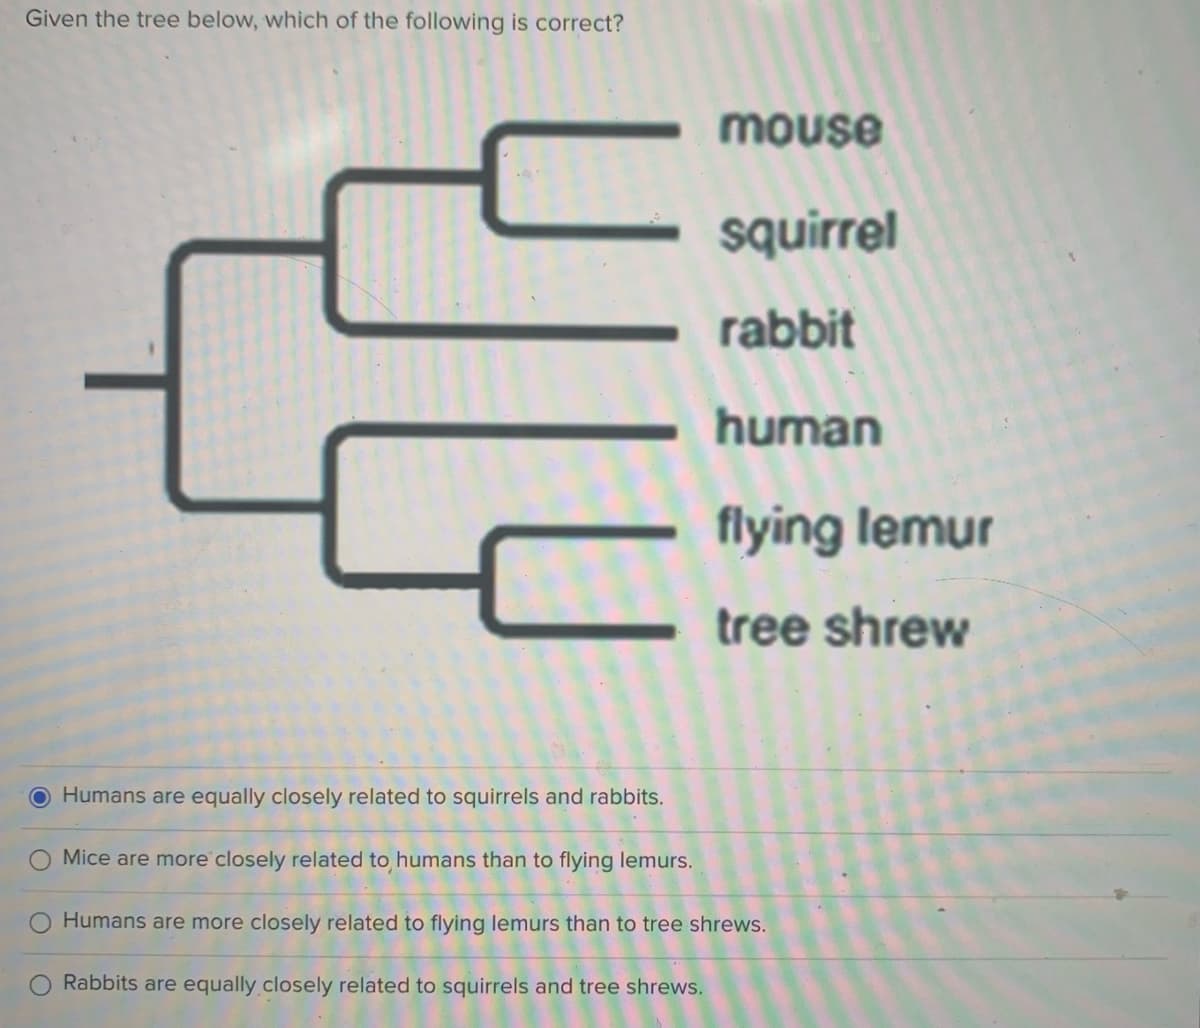 Given the tree below, which of the following is correct?
mouse
squirrel
rabbit
human
flying lemur
tree shrew
Humans are equally closely related to squirrels and rabbits.
Mice are more closely related to humans than to flying lemurs.
Humans are more closely related to flying lemurs than to tree shrews.
Rabbits are equally closely related to squirrels and tree shrews.
